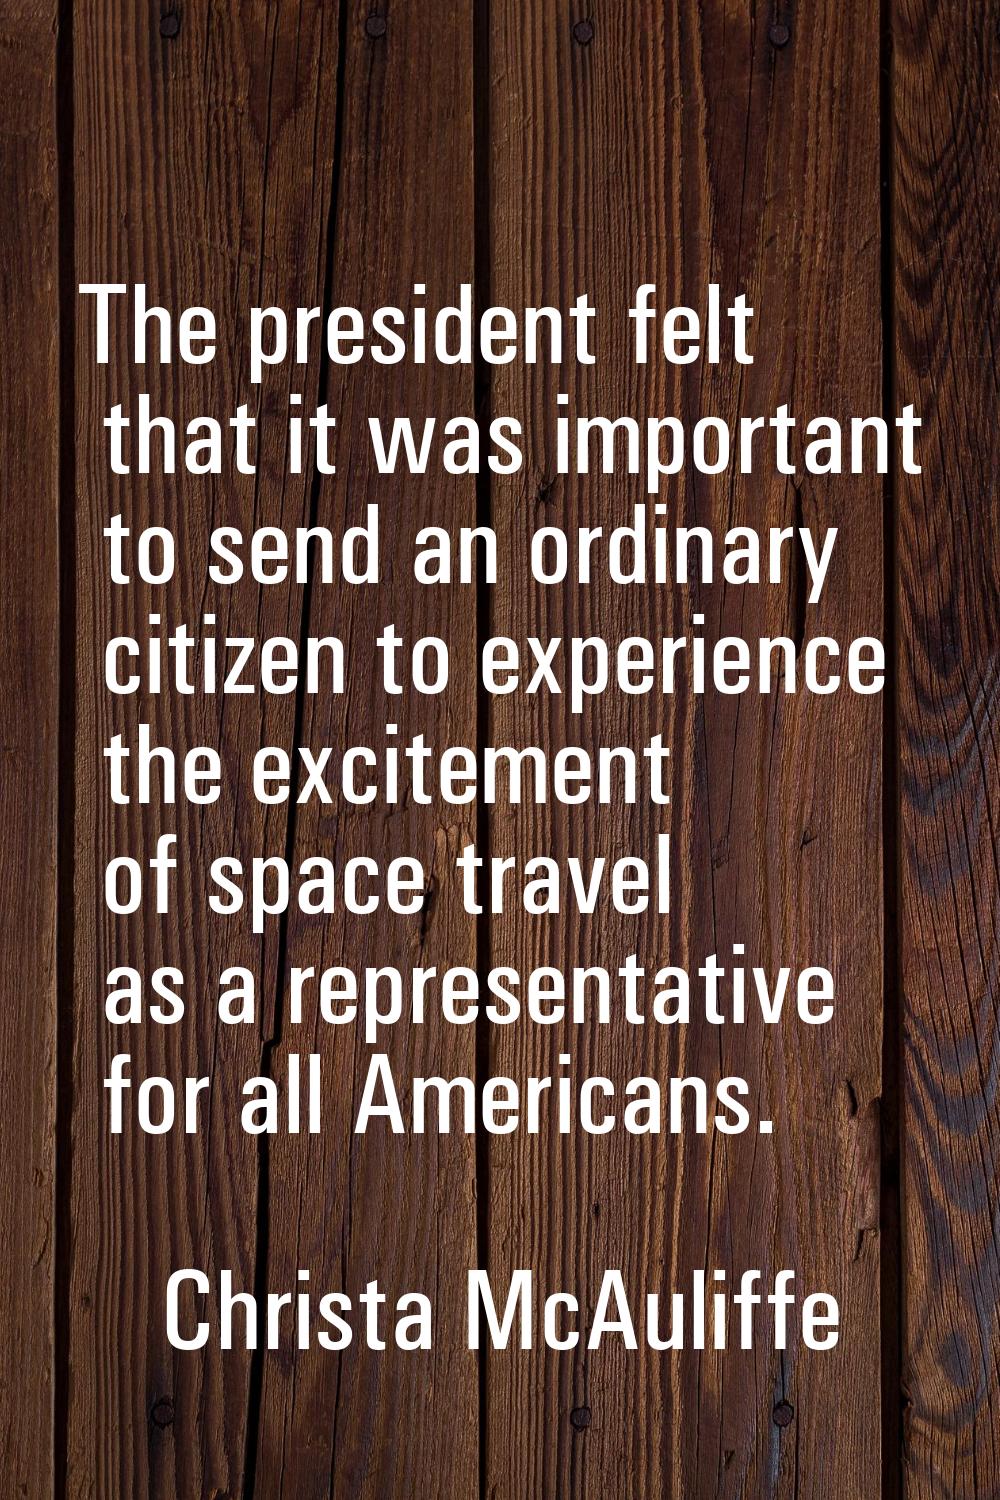 The president felt that it was important to send an ordinary citizen to experience the excitement o